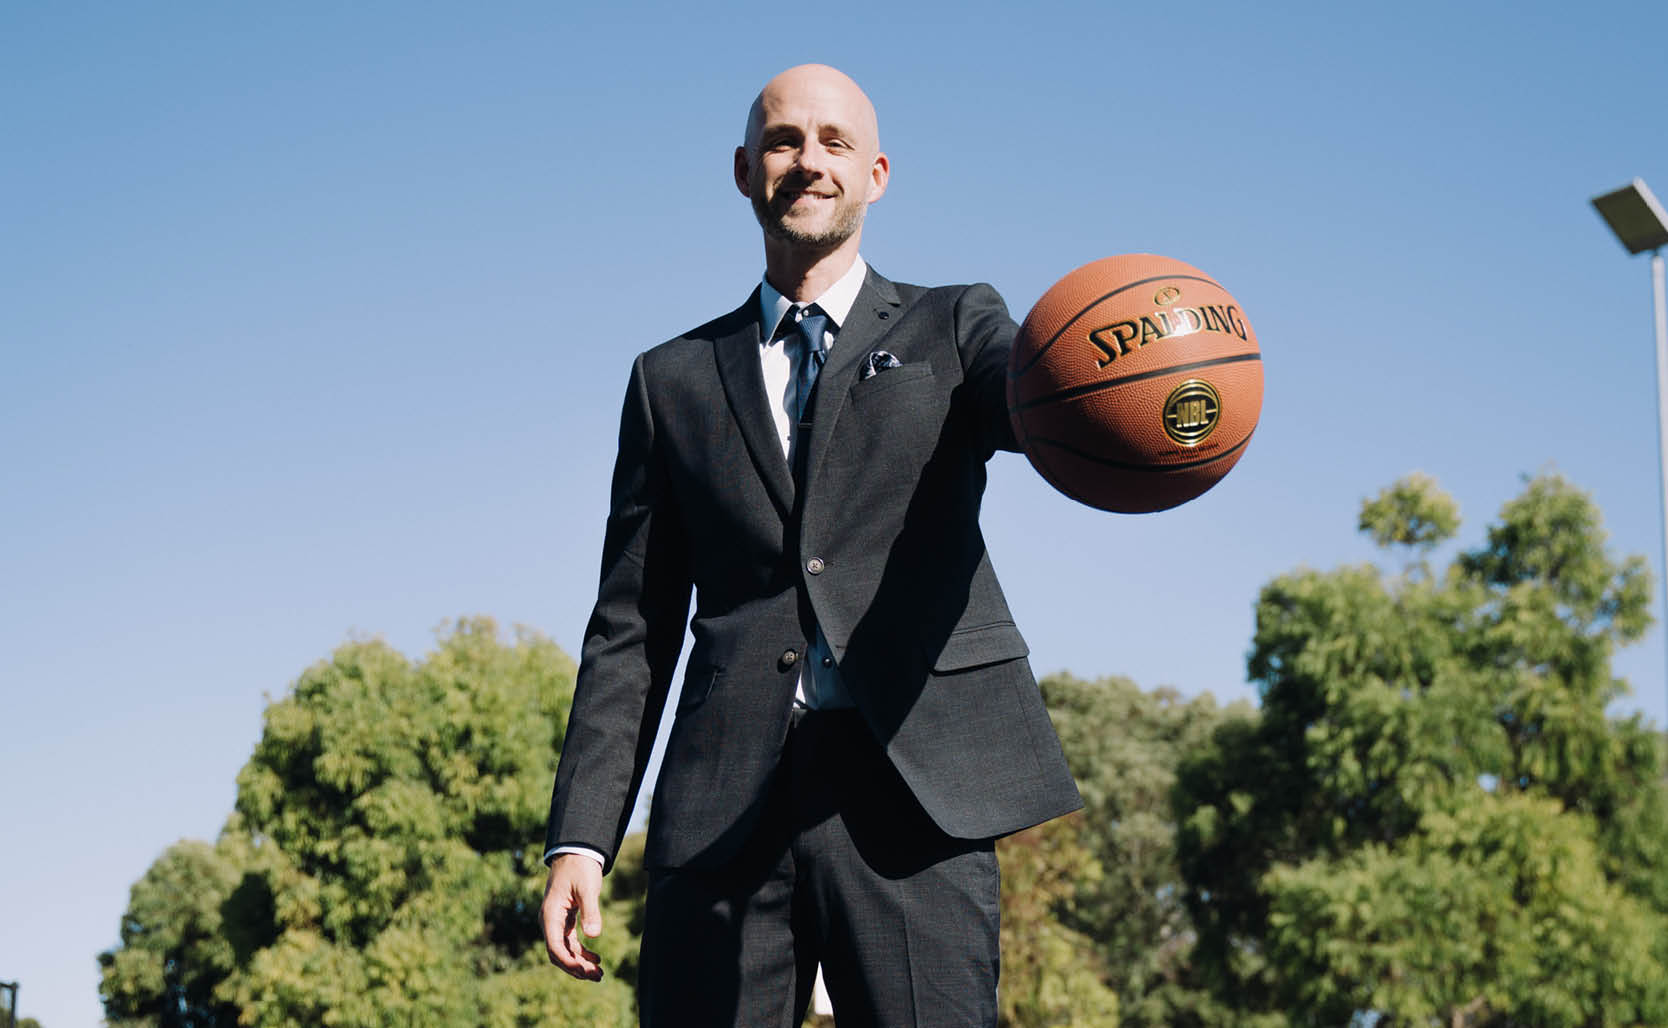 Jarrod walsh outside on basketball court  in suit holding basketball